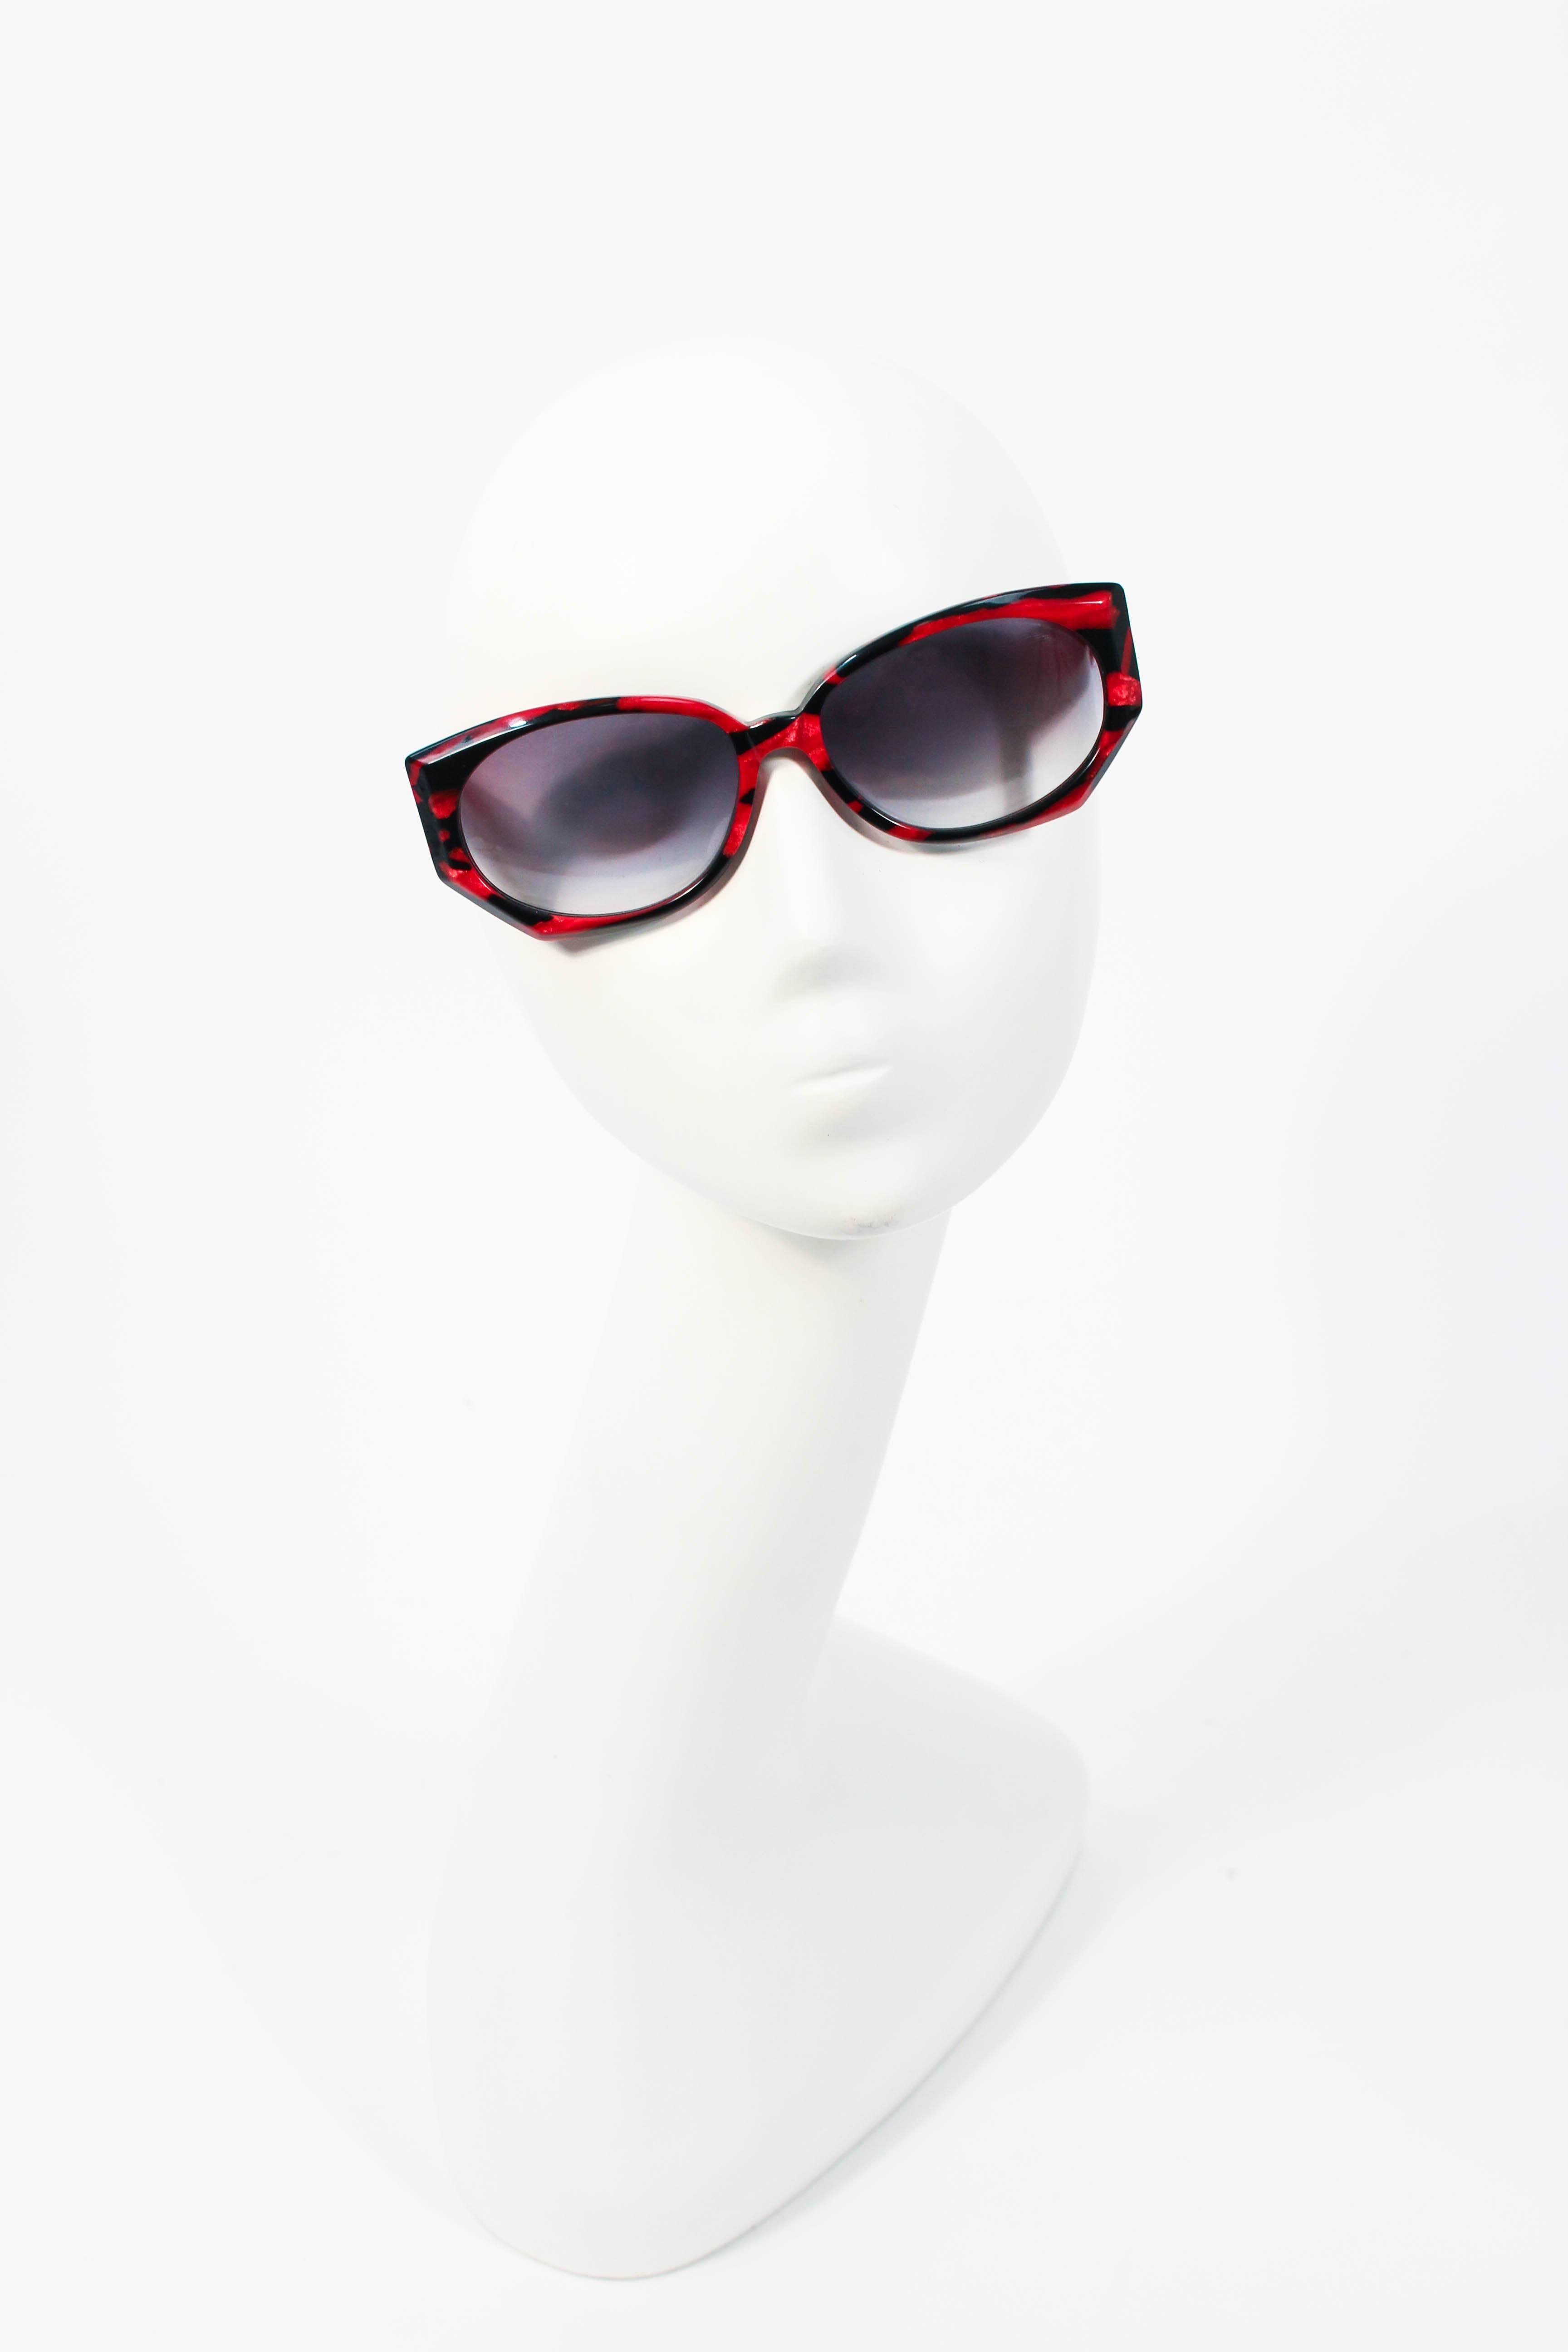 These Krizia sunglasses are composed of a marbled black and red plastic. Features a stunning wide style frame, with a fashionably chic design. In great vintage condition.

**Please cross-reference measurements for personal accuracy. Size in